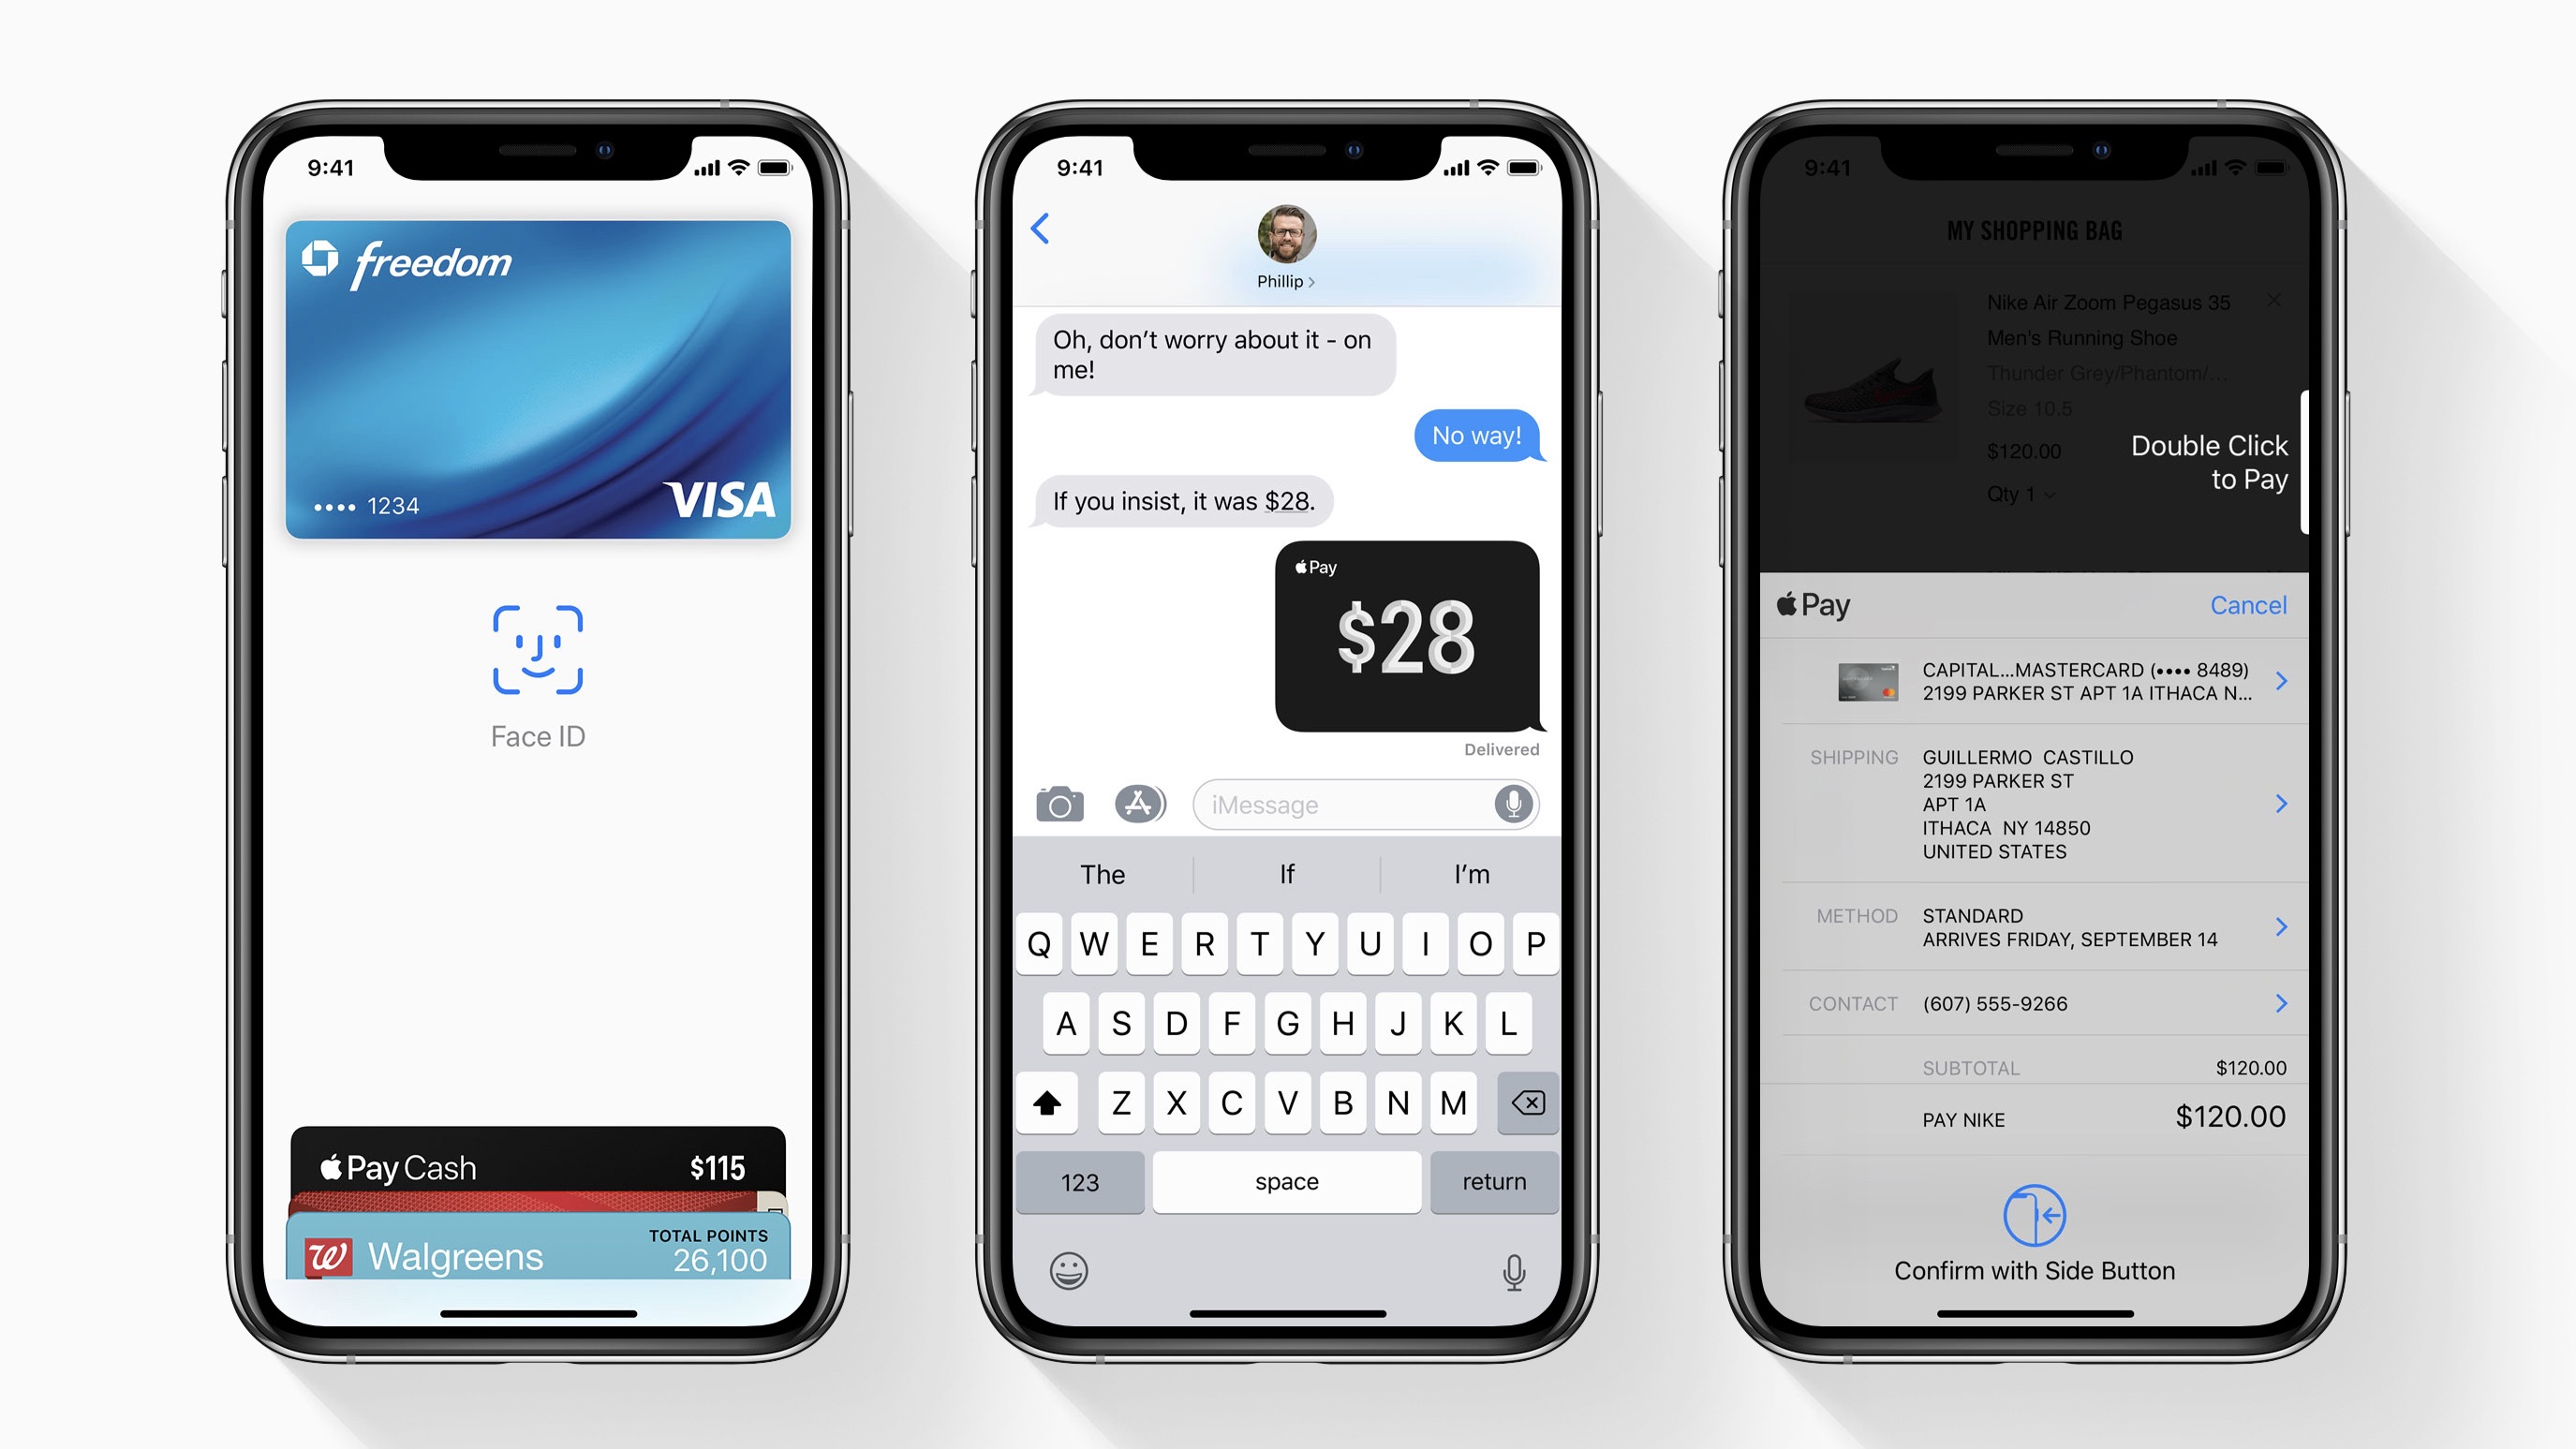 Does iPhone XR have contactless pay?